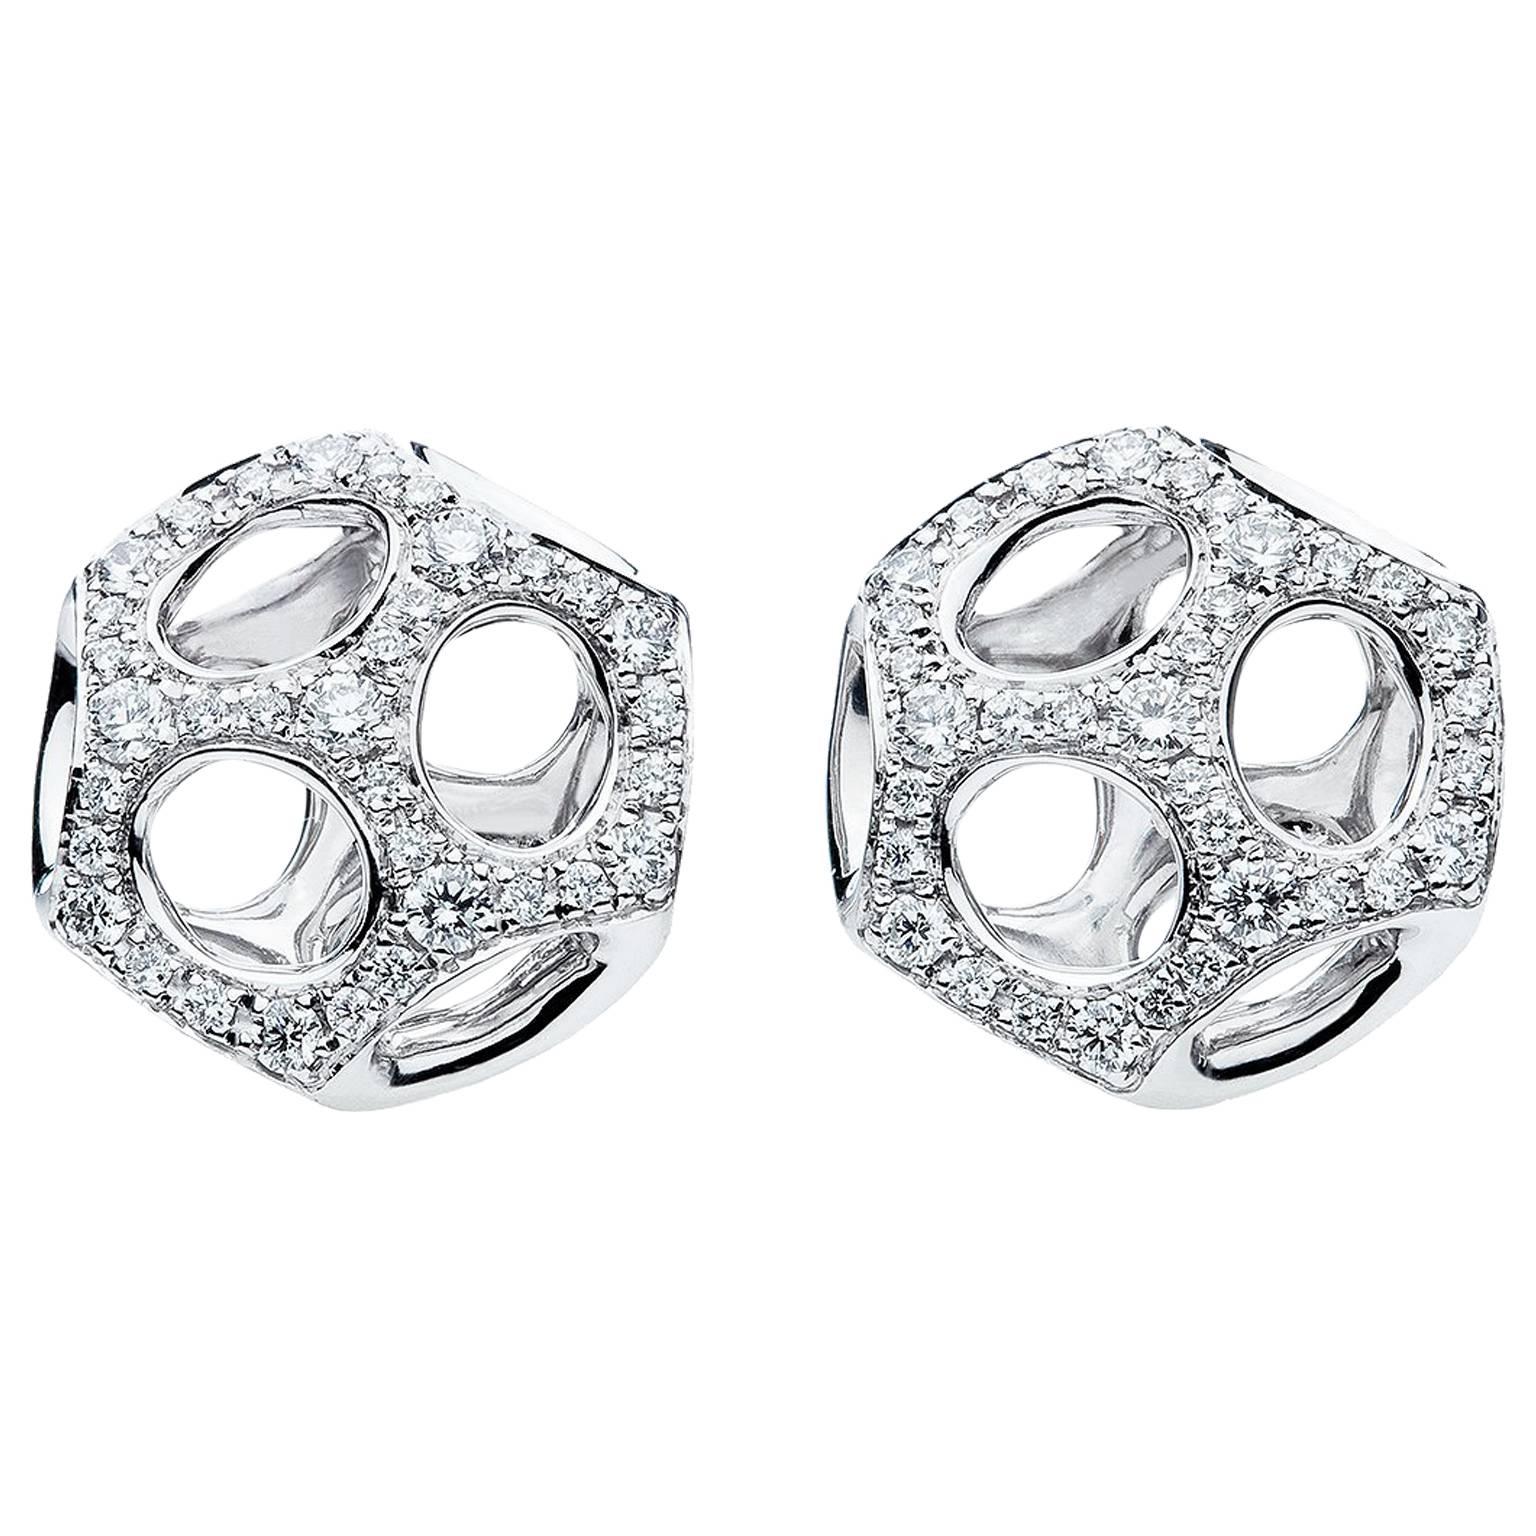 Towe Norlen Contemporary Round White Diamond and Gold Earrings Stud  For Sale